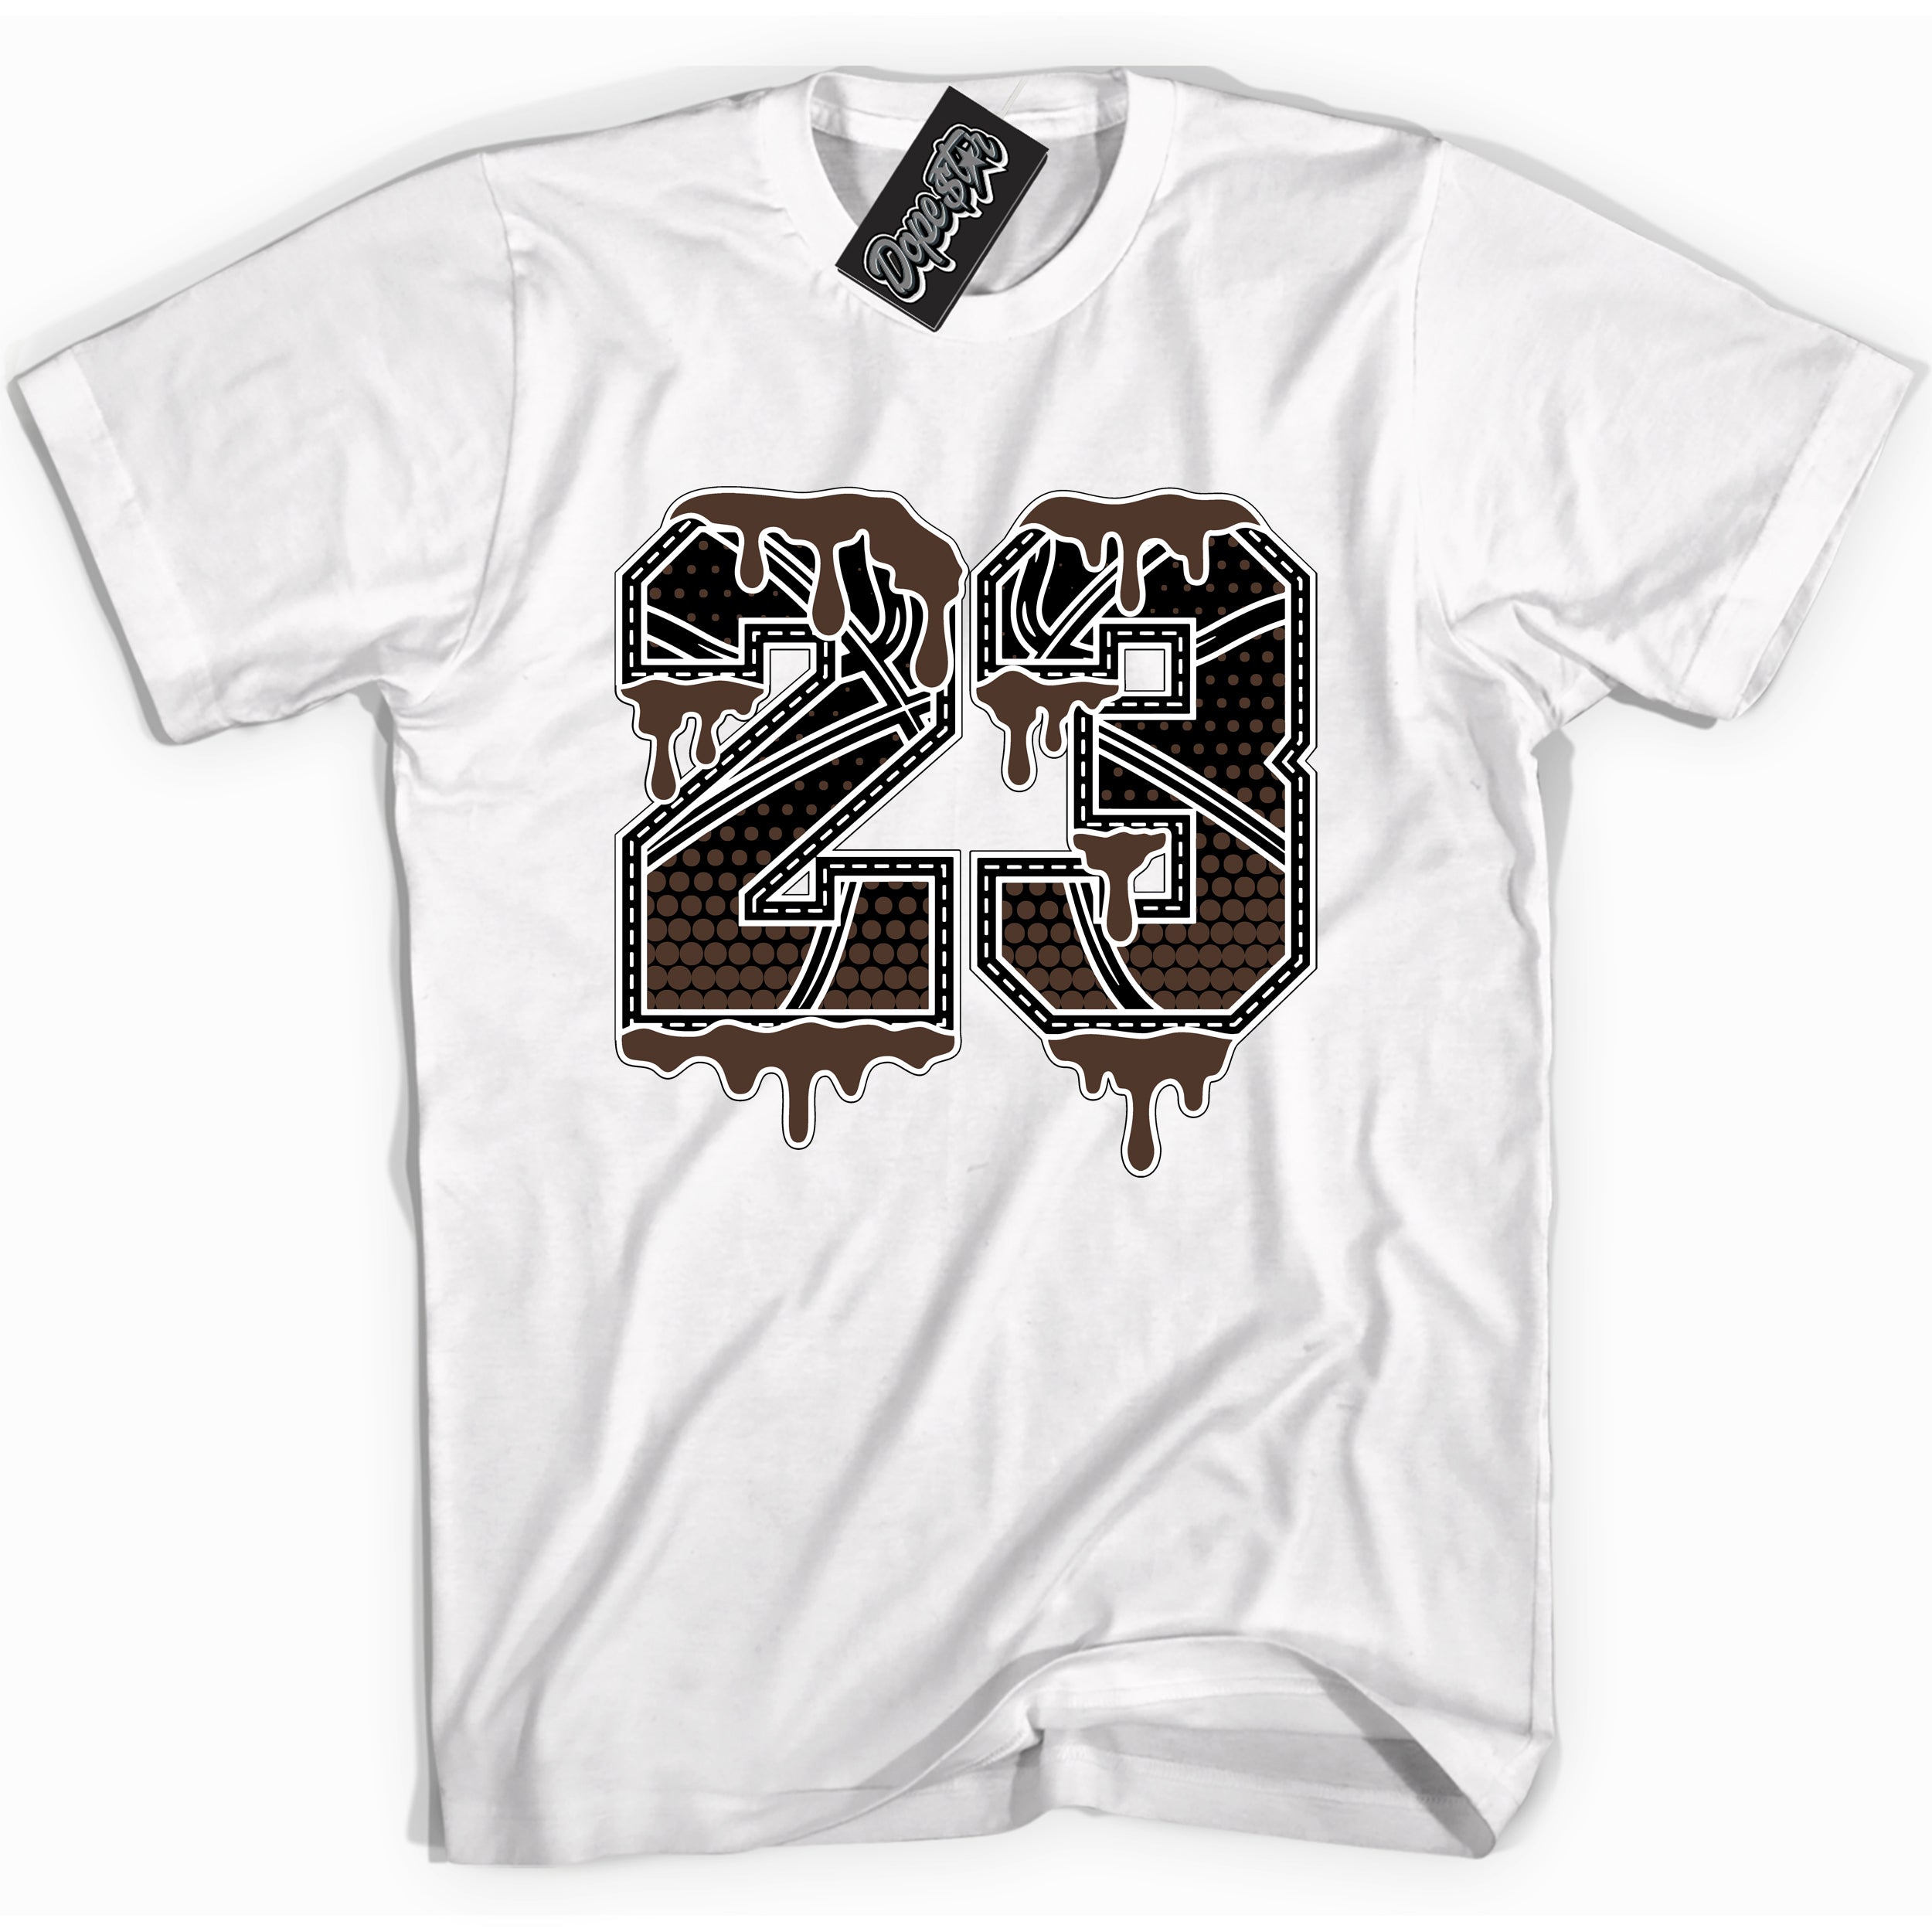 Cool White graphic tee with “ 23 Ball ” design, that perfectly matches Palomino 1s sneakers 